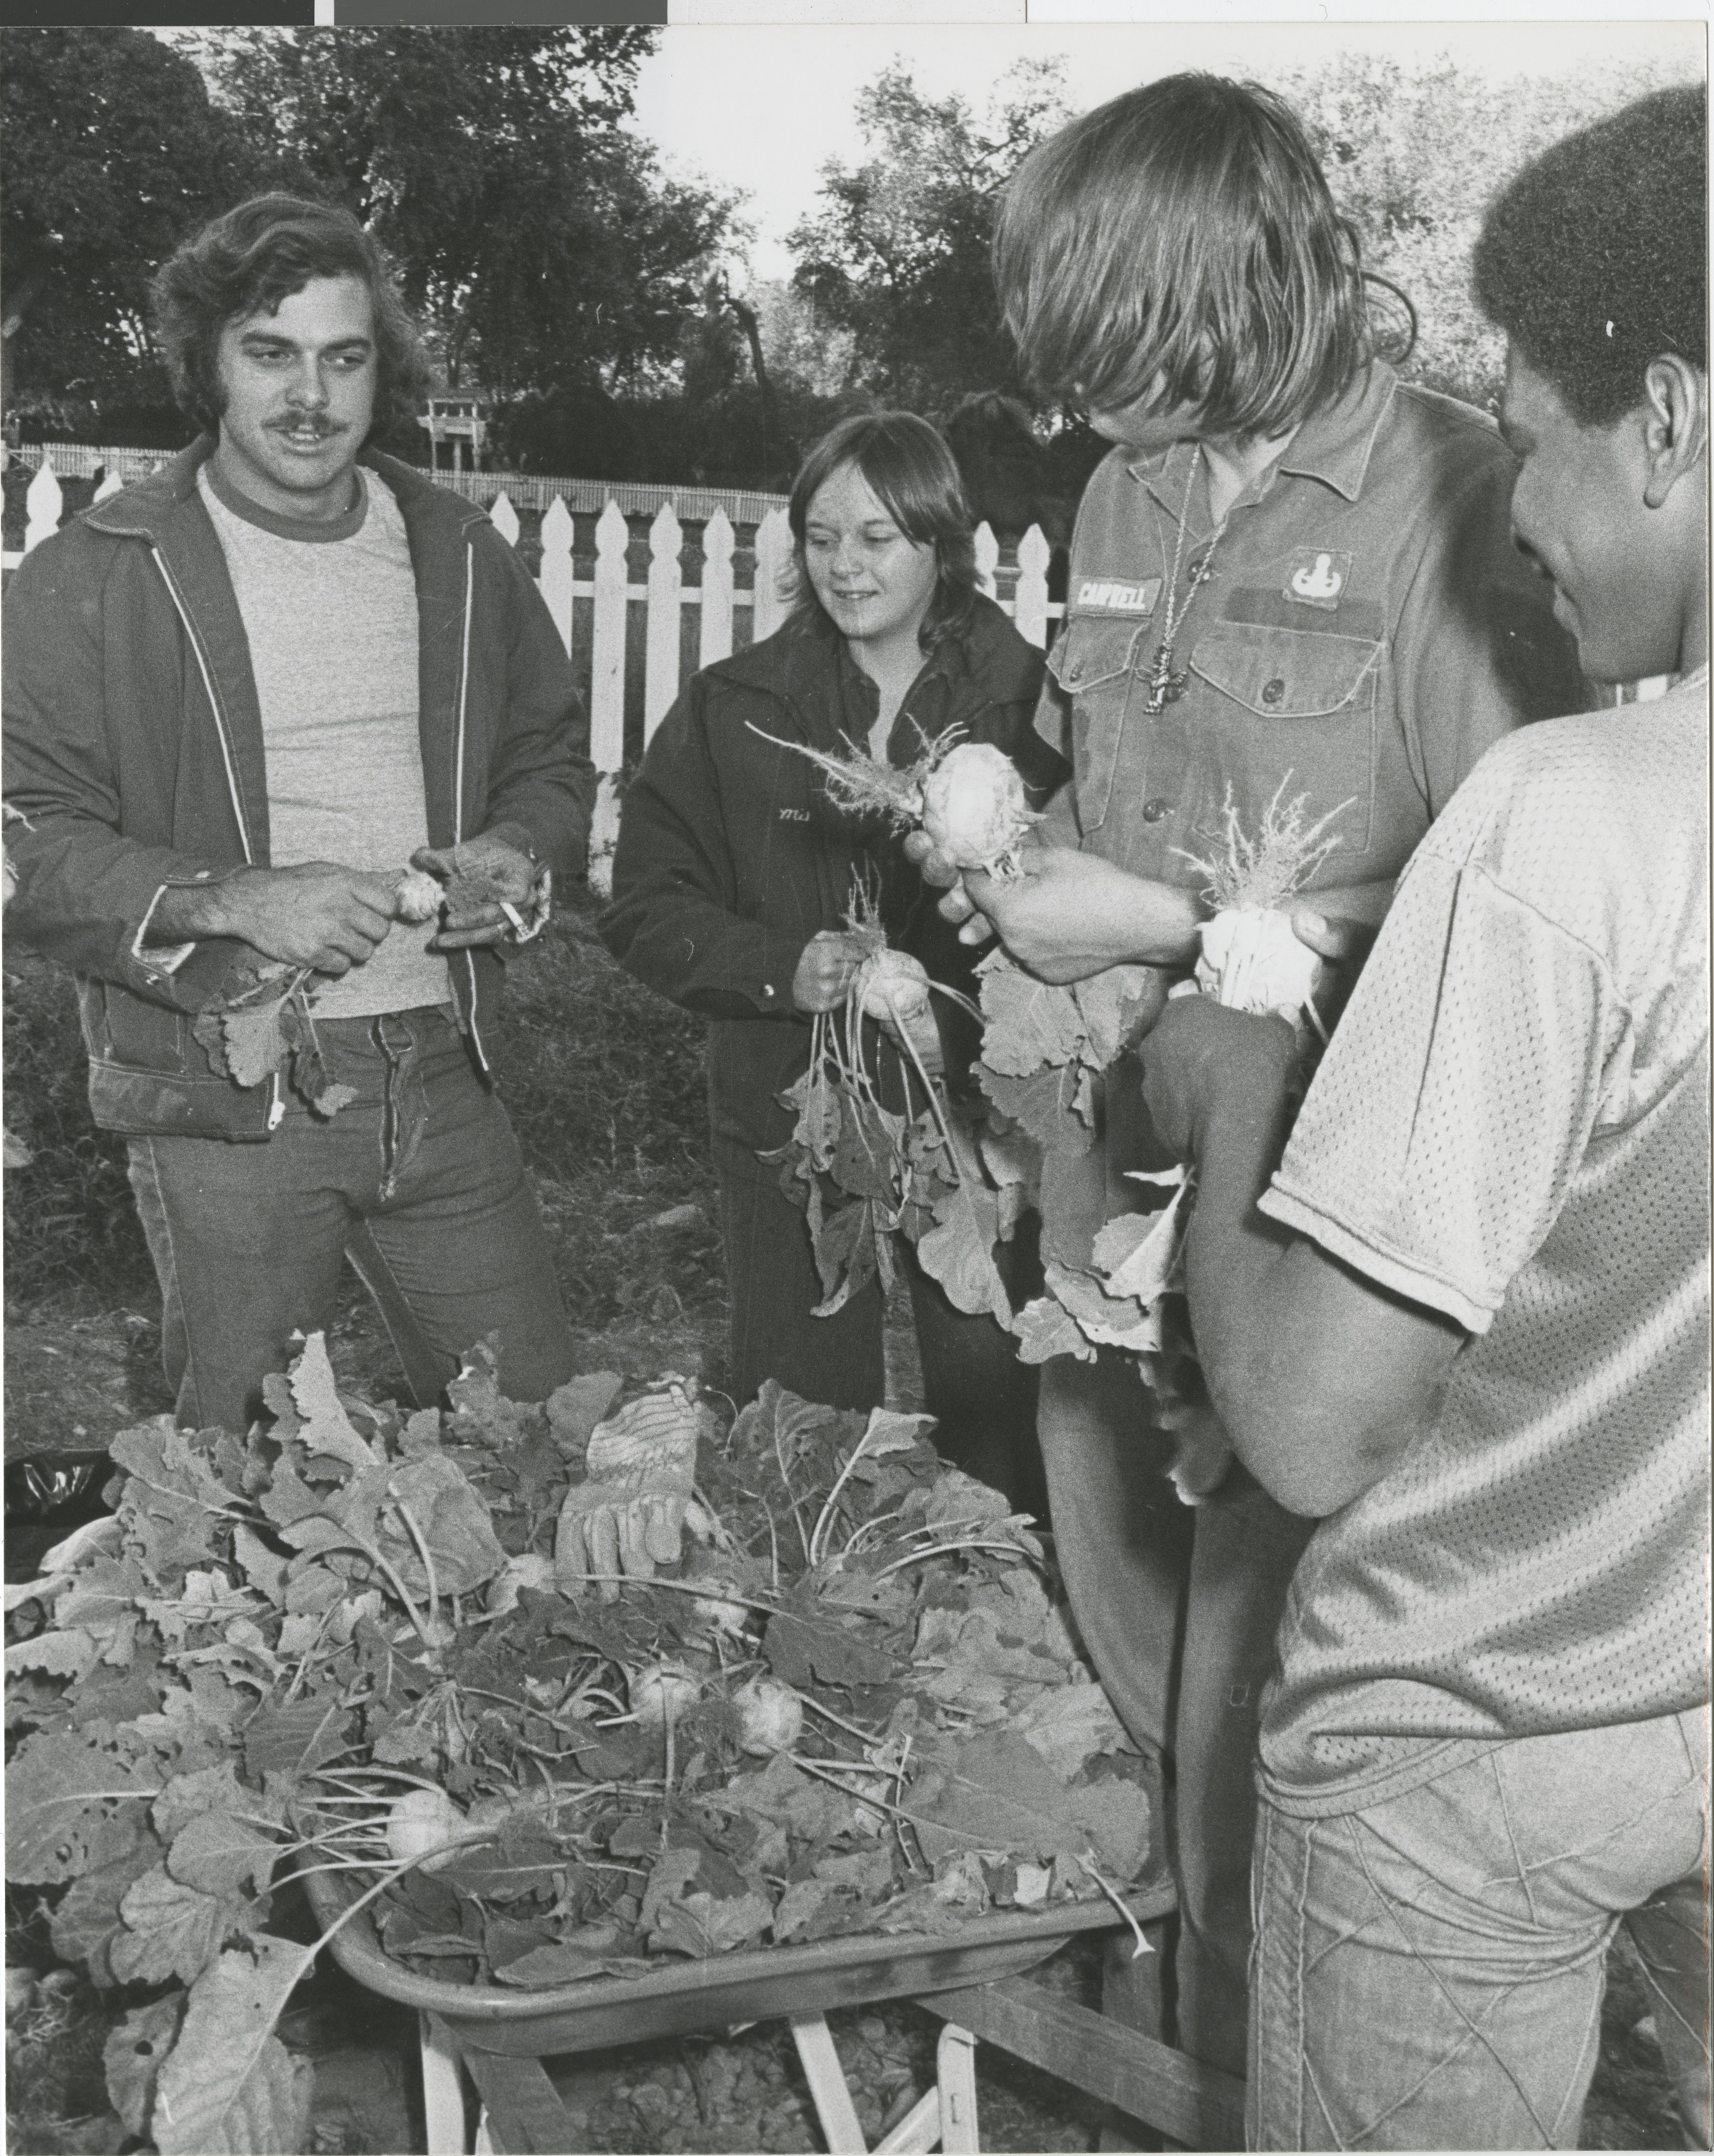 Photograph of community members planting trees and vegetables